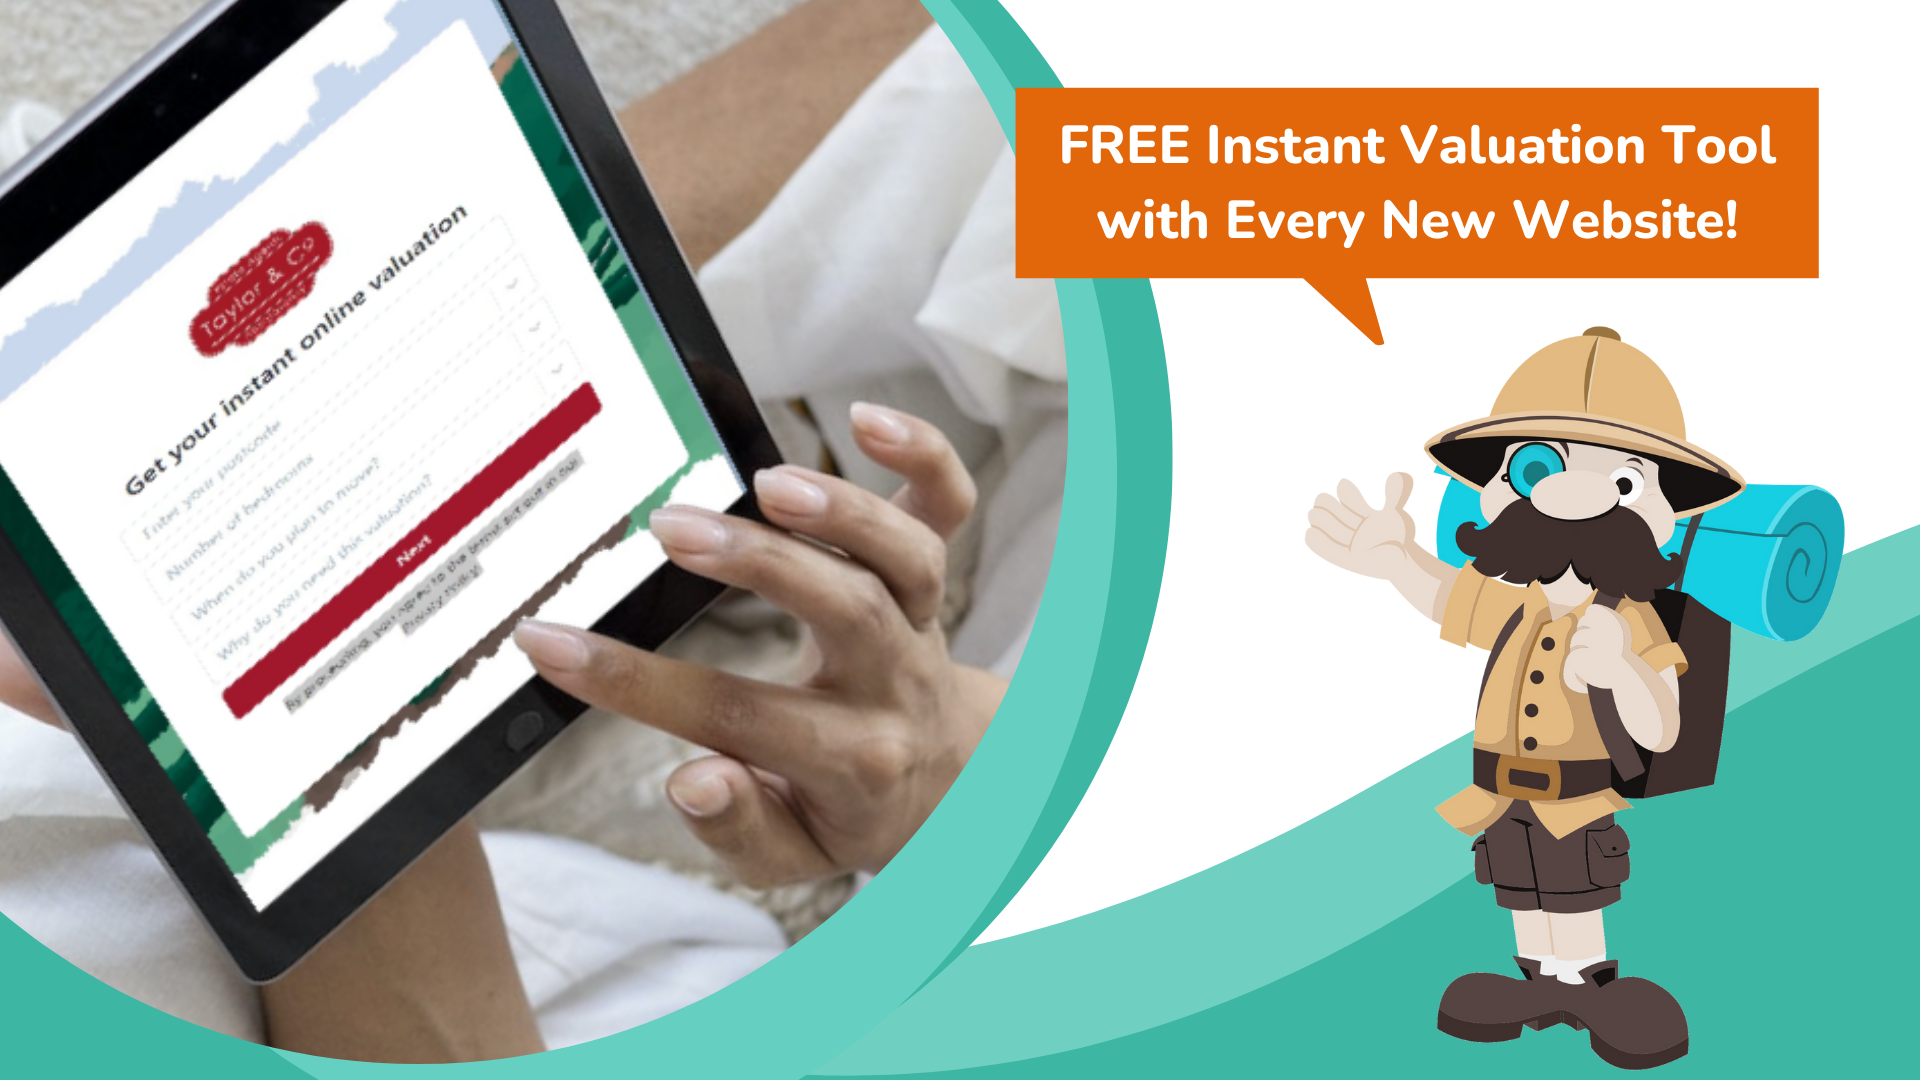 FREE INSTANT VALUATION TOOL